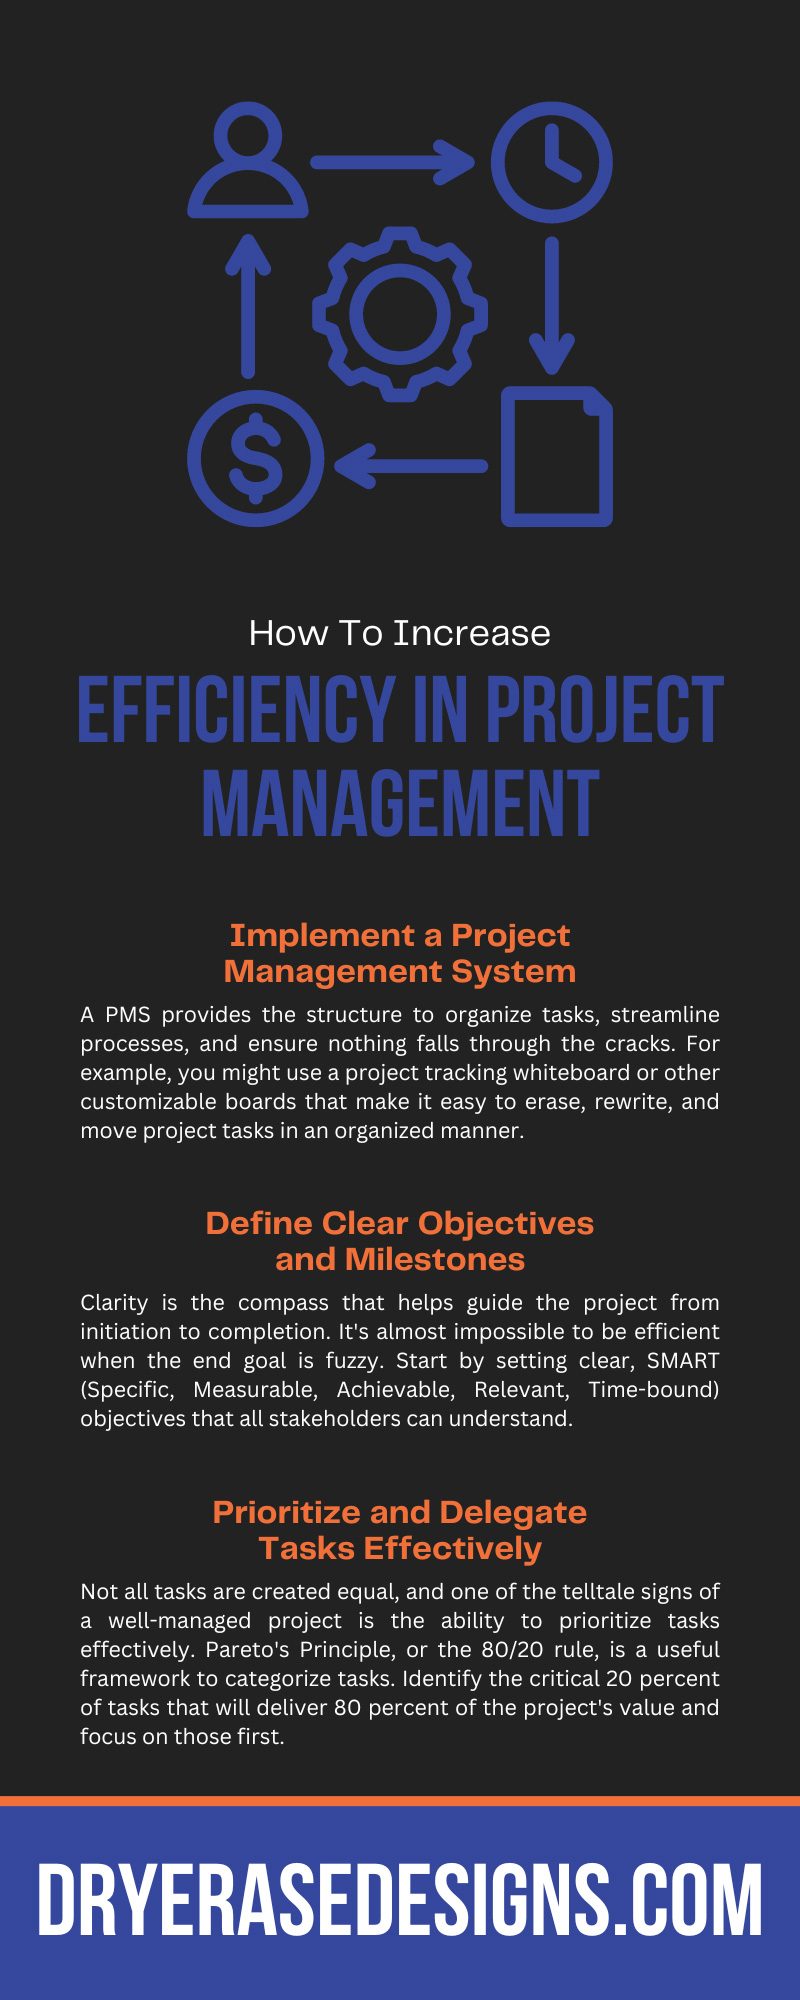 How To Increase Efficiency in Project Management